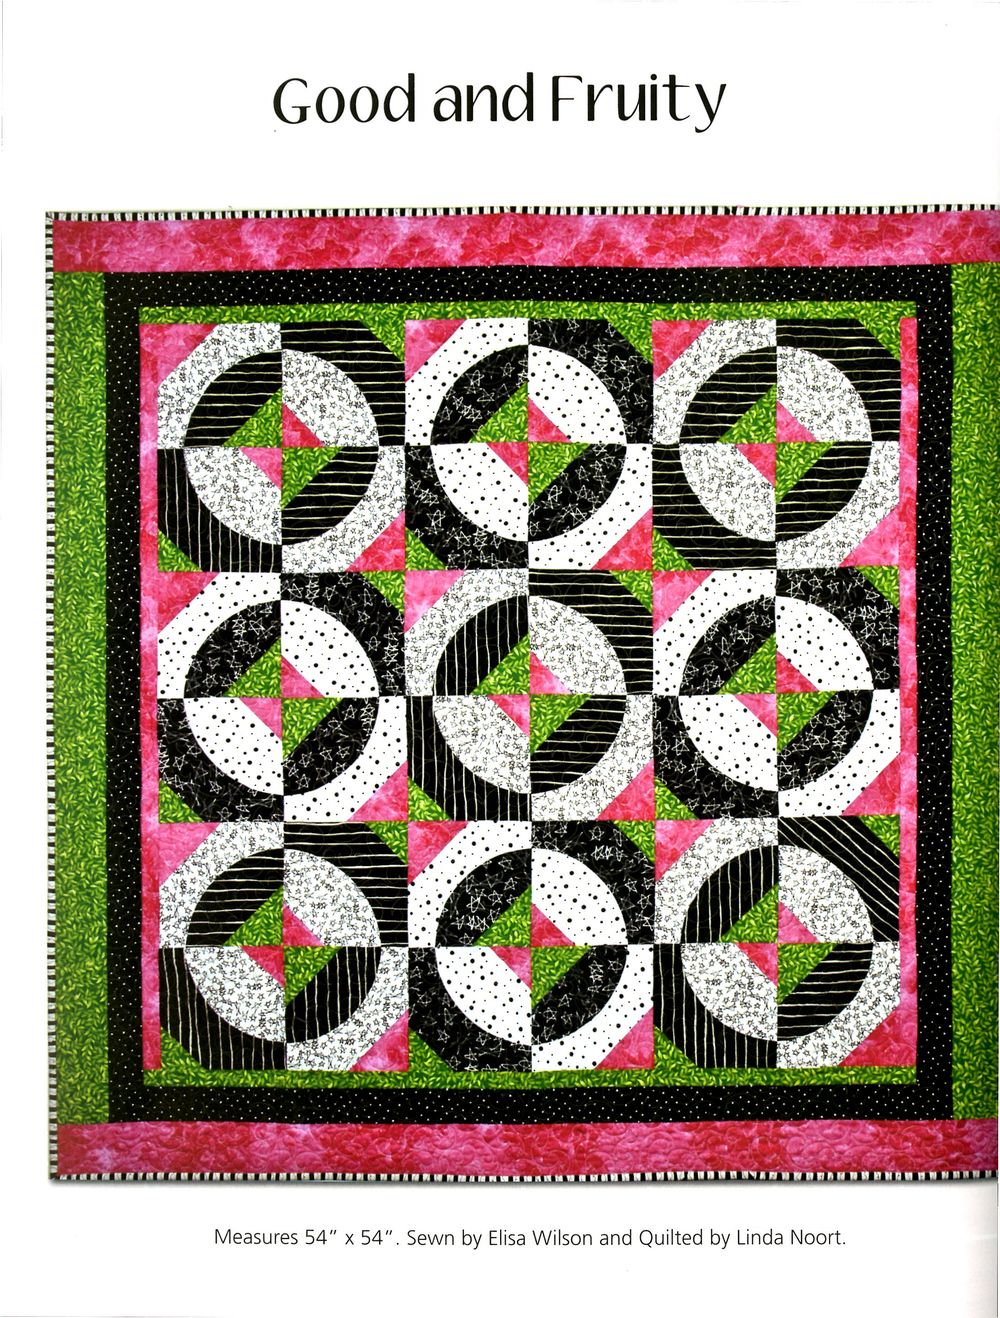 Crazy Curves Continues Quilt Pattern Book By Elisa Wilson of Backporch Design